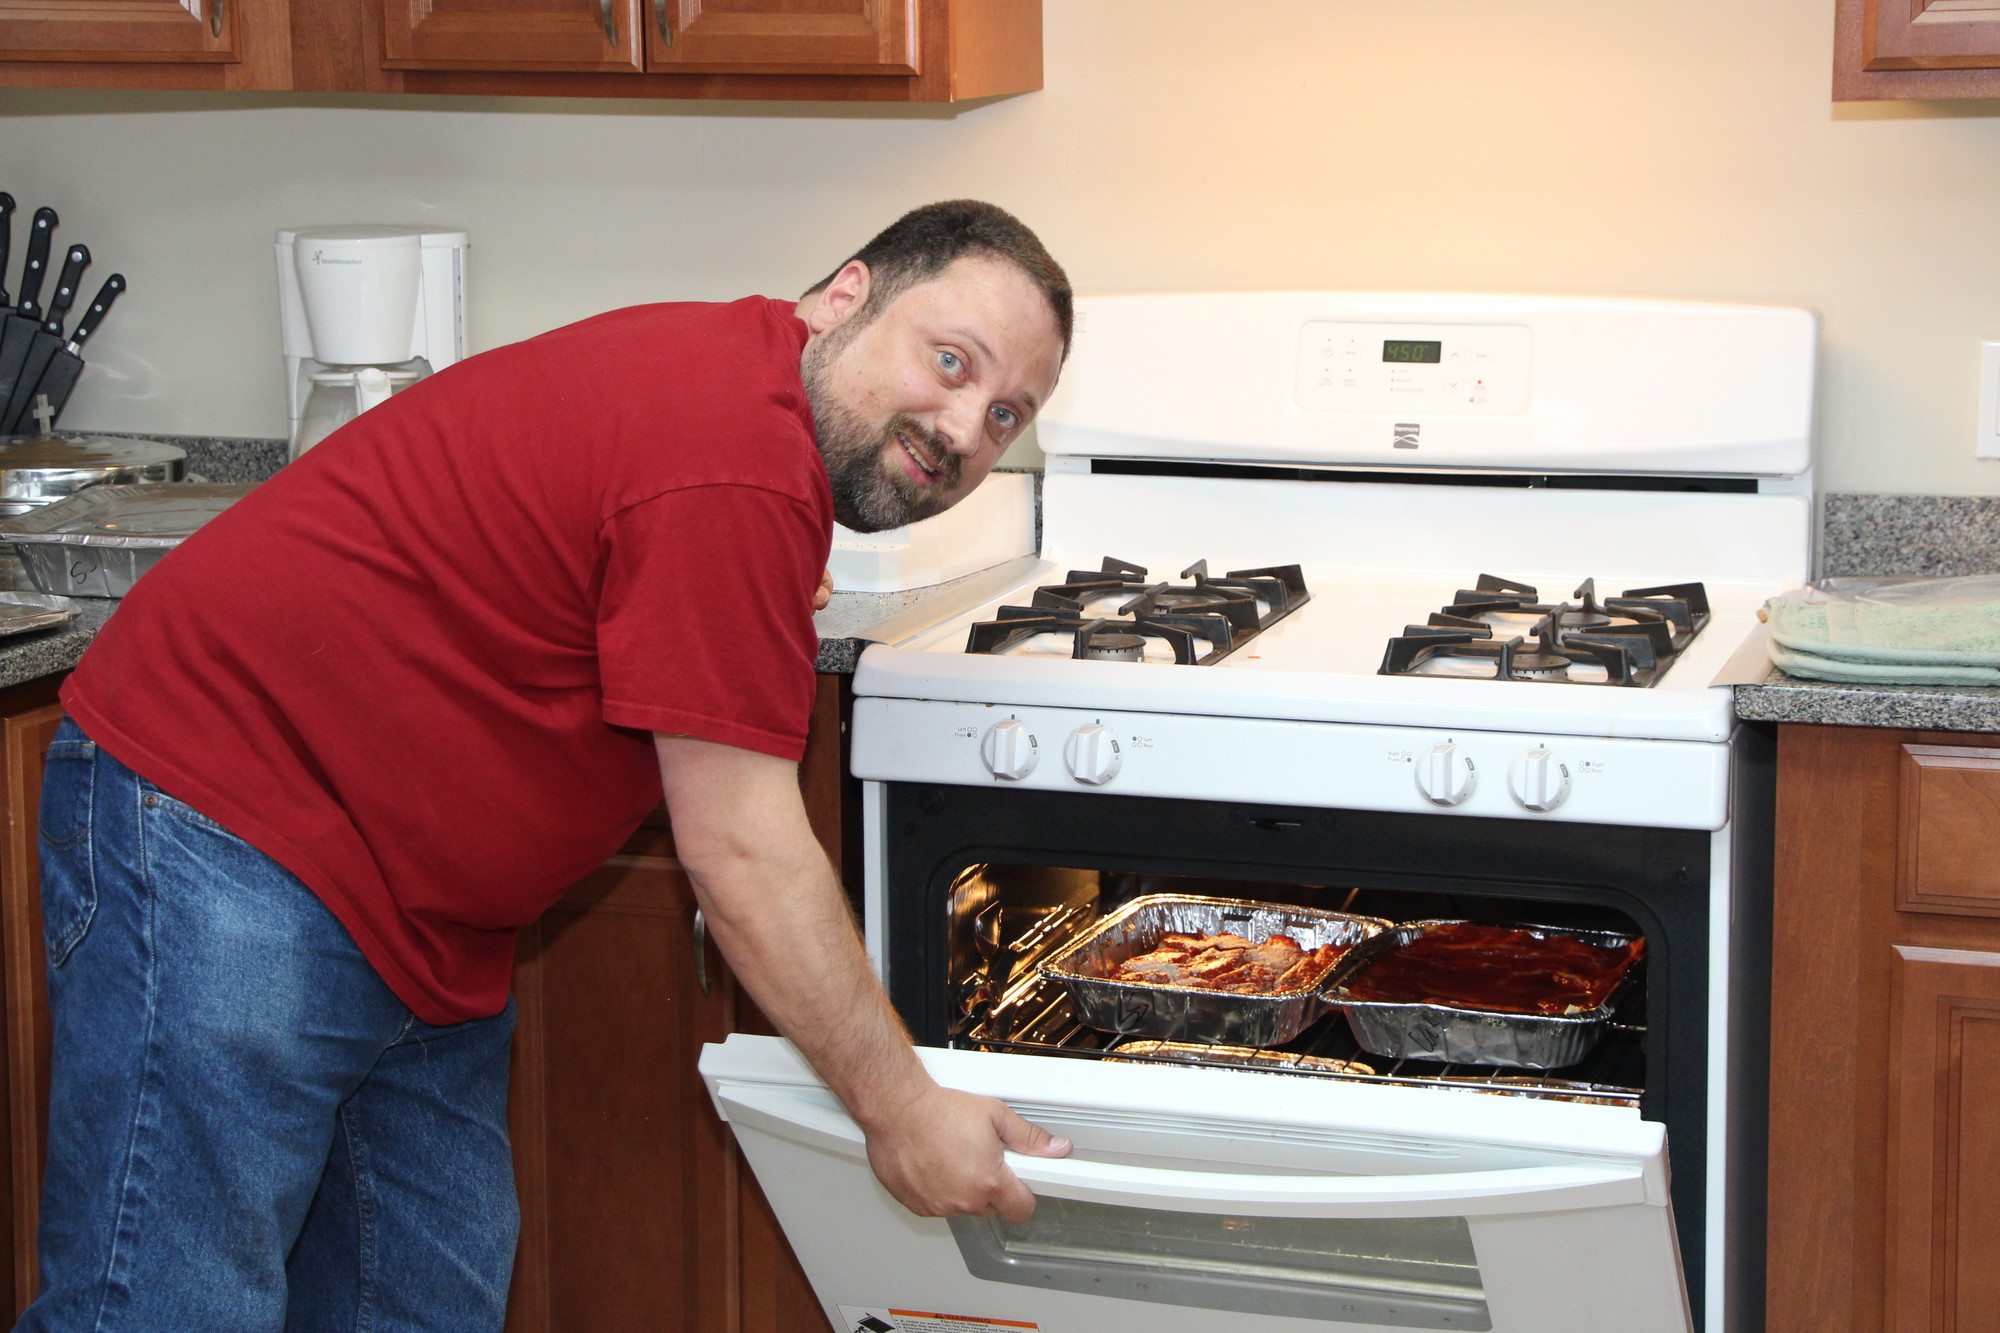 John Funaro checked out the oven to see if the food was hot enough for all the mothers in attendance.